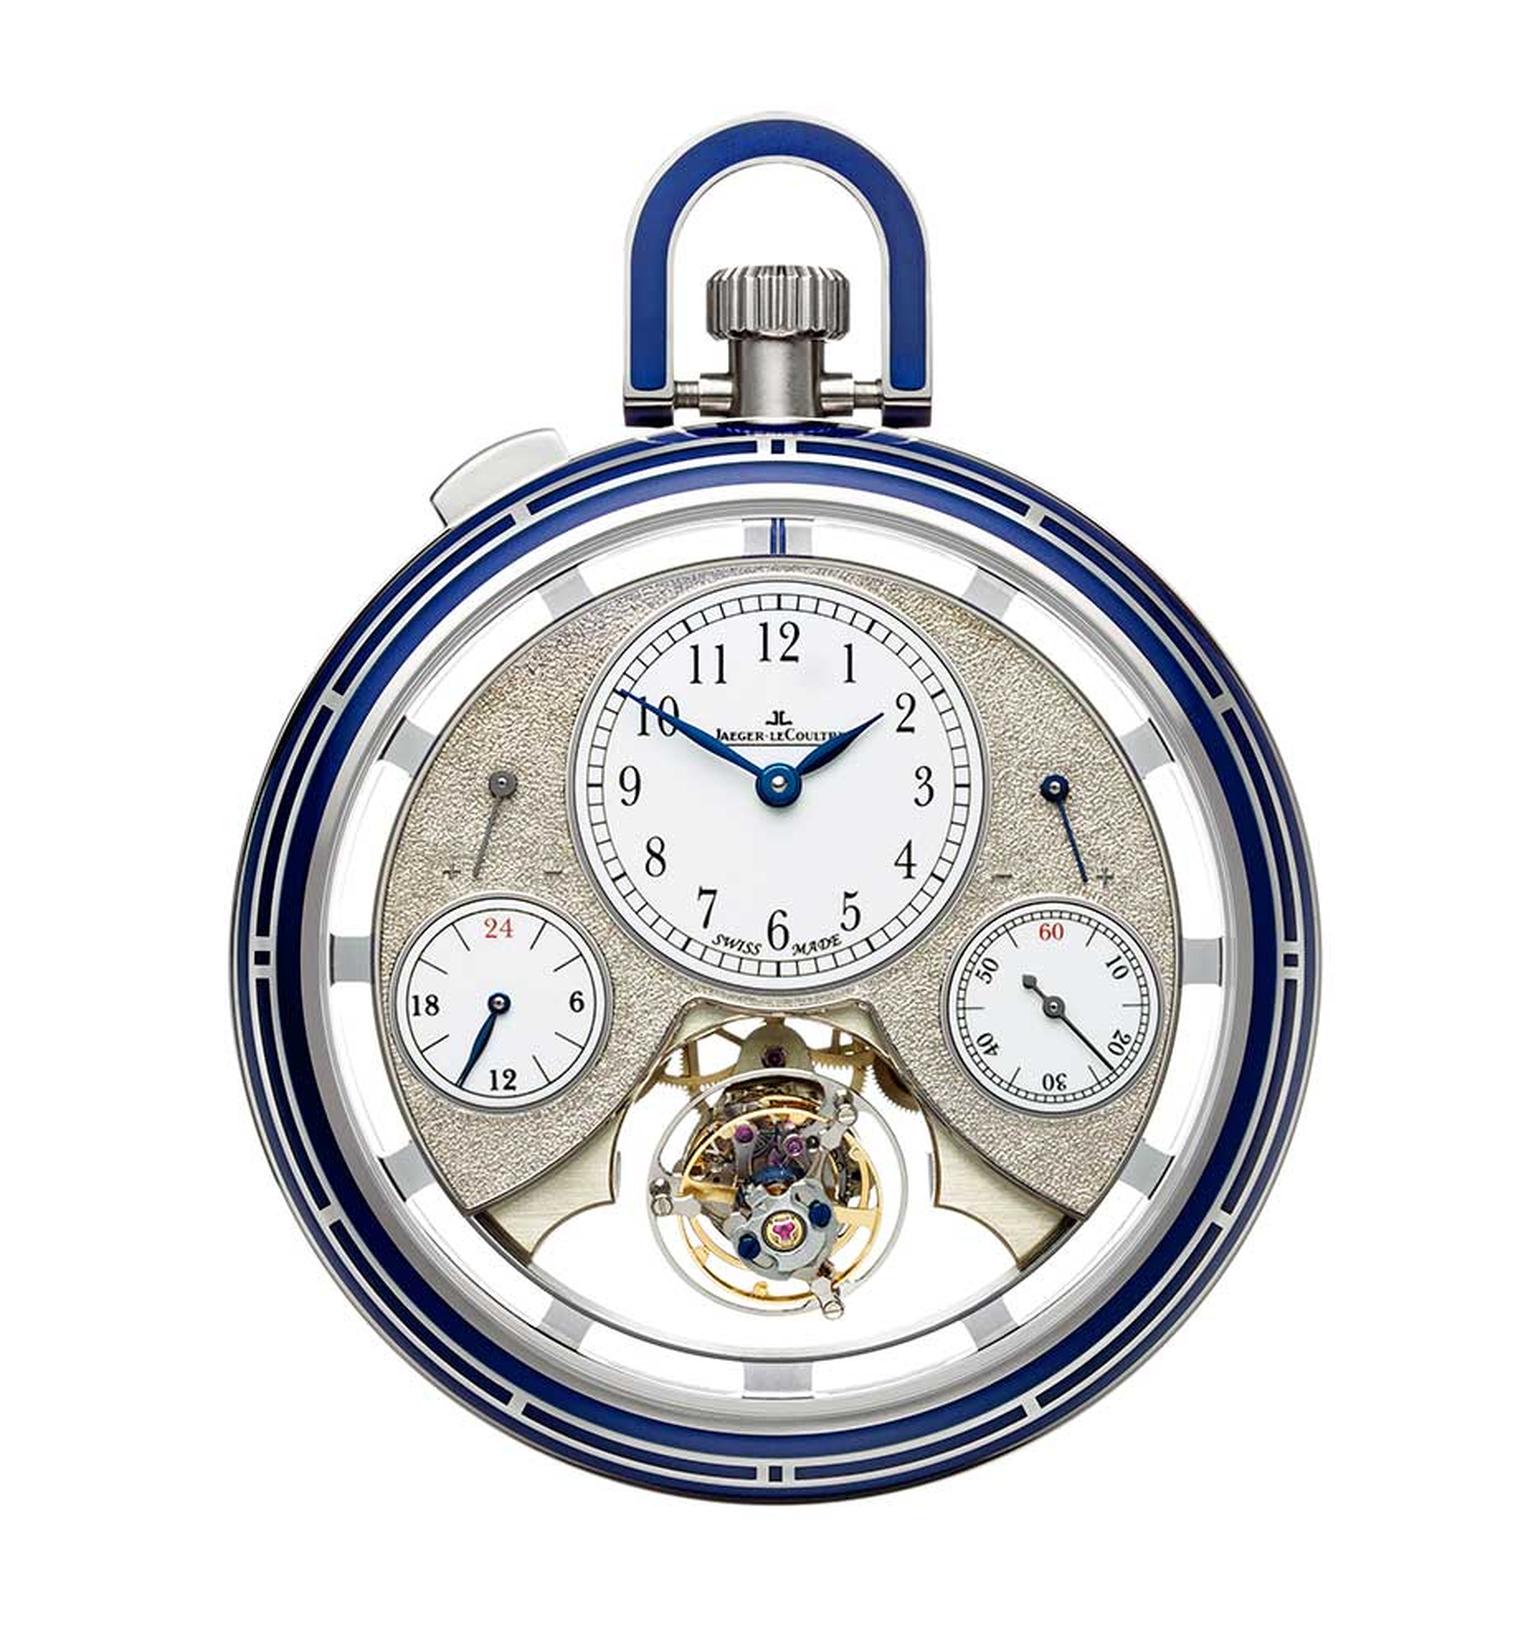 Jaeger-LeCoultre Duomètre Sphérotourbillon pocket watch is the first one to include a  spherical tourbillon.